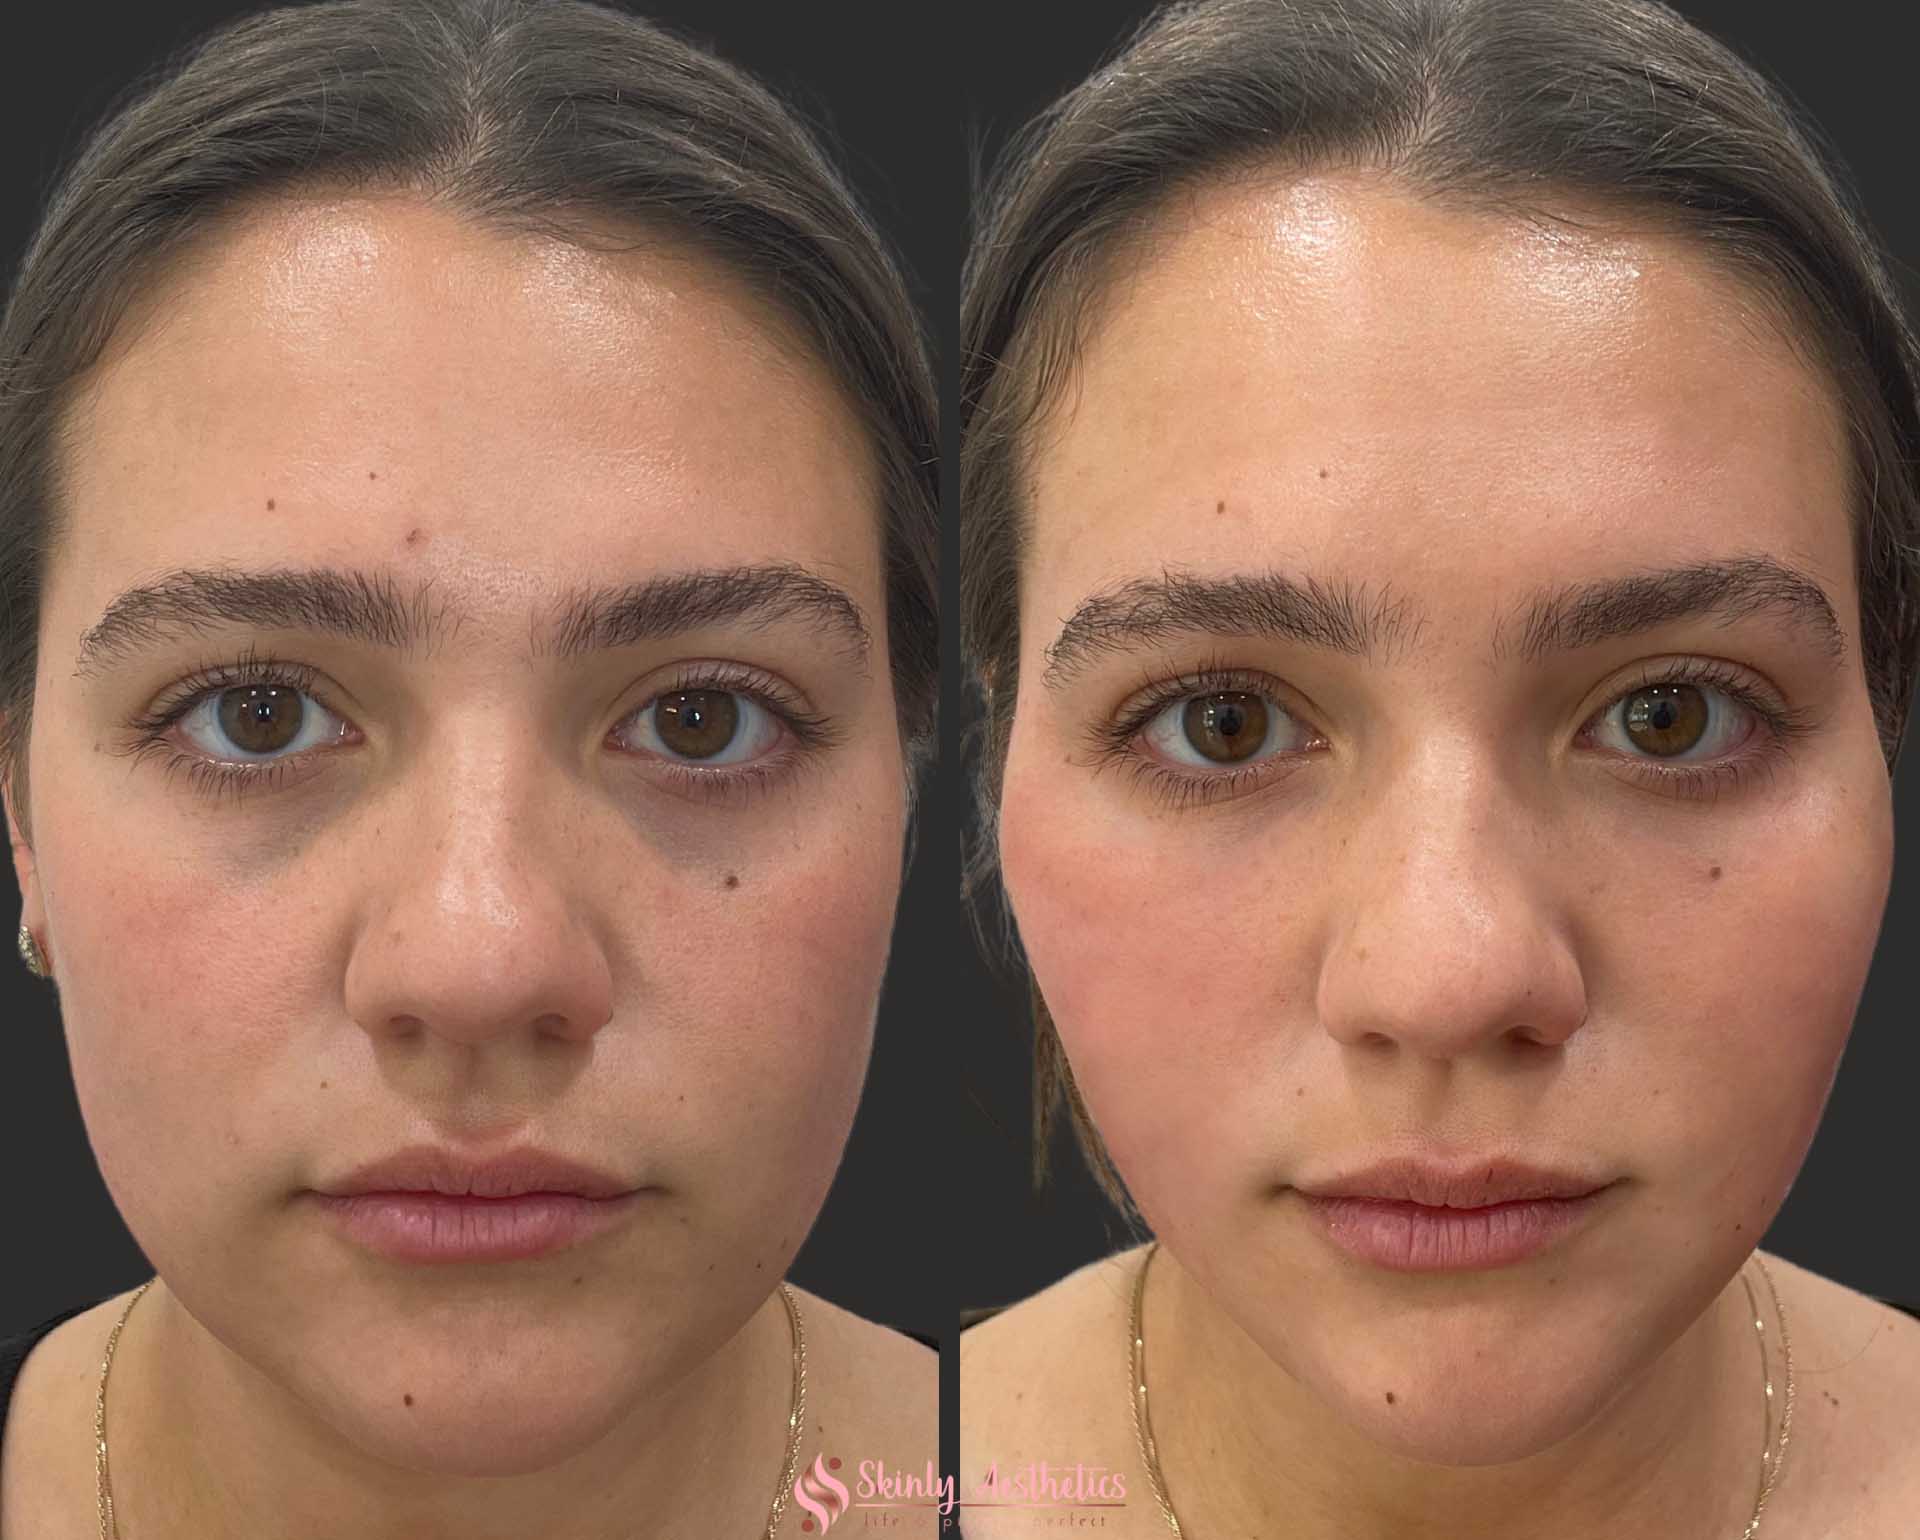 before and after results of non-surgical PDO thread lift for facial lifting and tightening